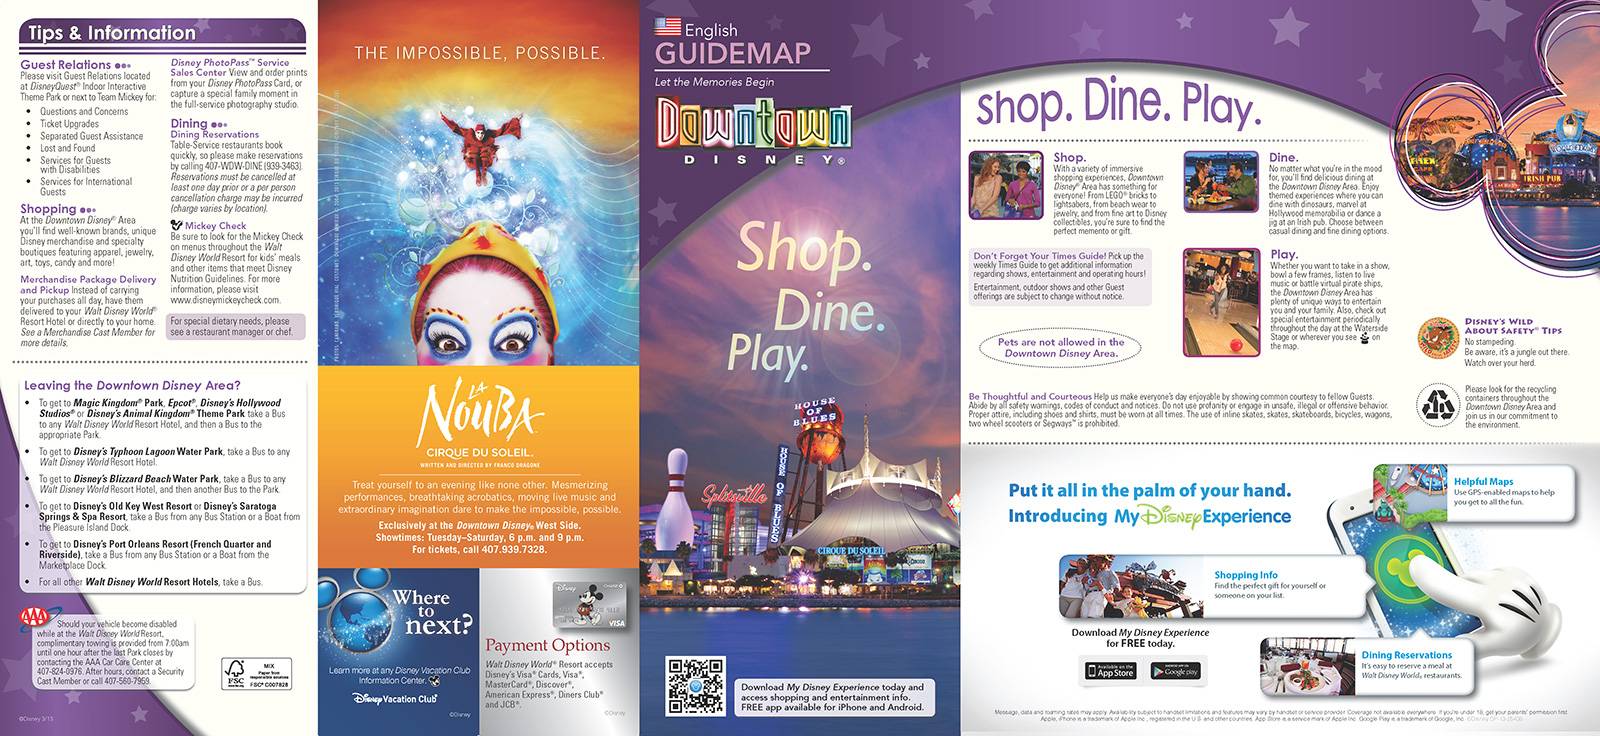 New 2013 Downtown Disney Guidemap Page 1